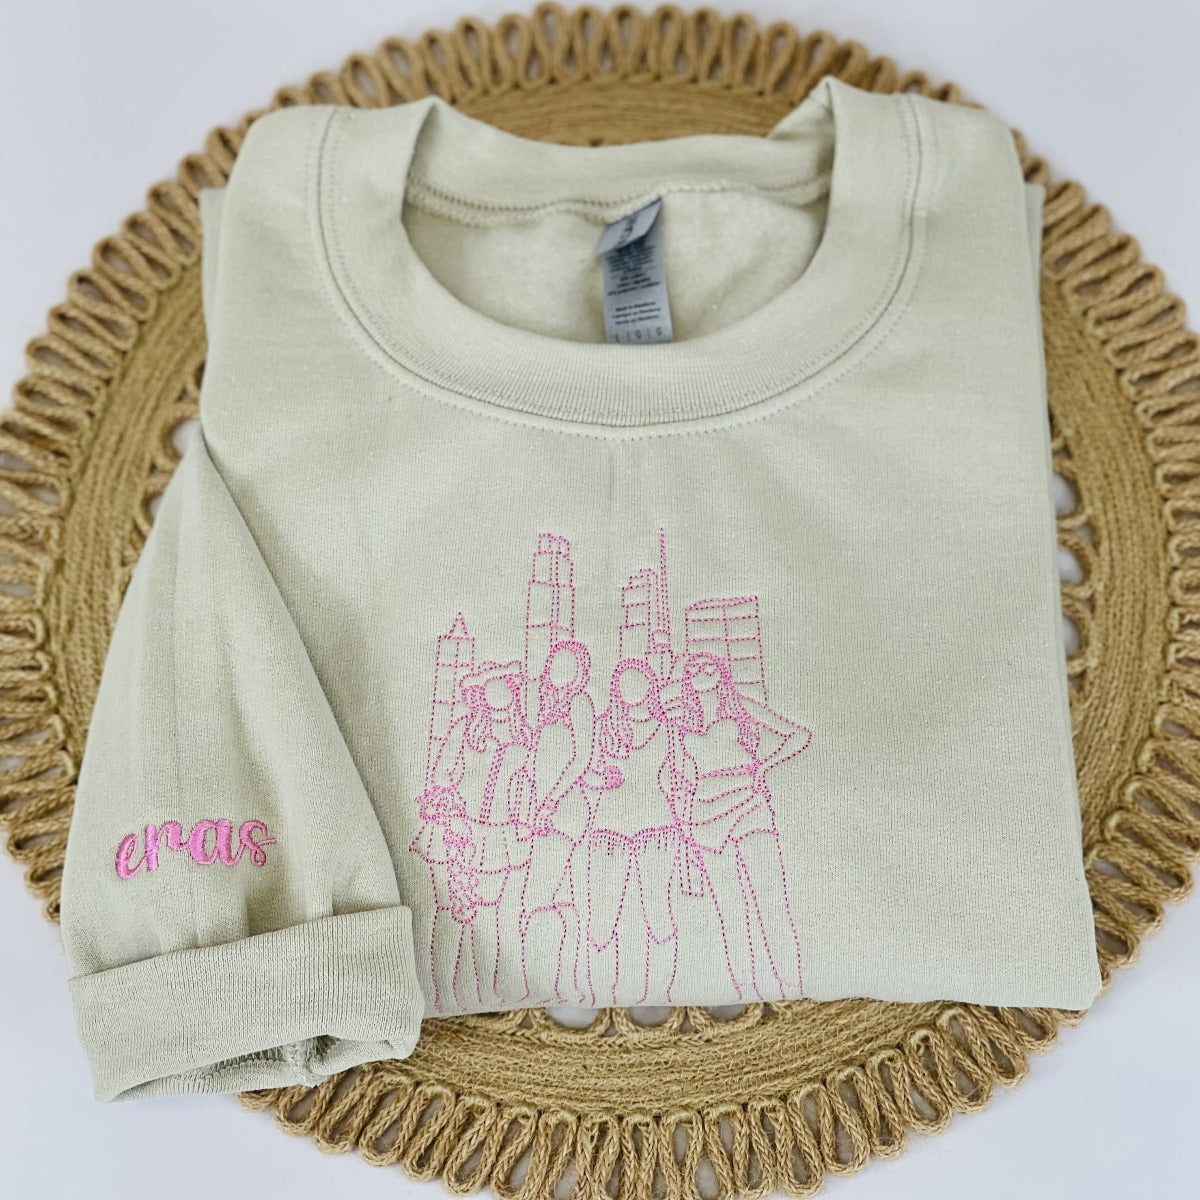 Personalized Best Friend Sweatshirts for 3 with Portrait Embroidery from Your Photo, Name Initial on Sleeve